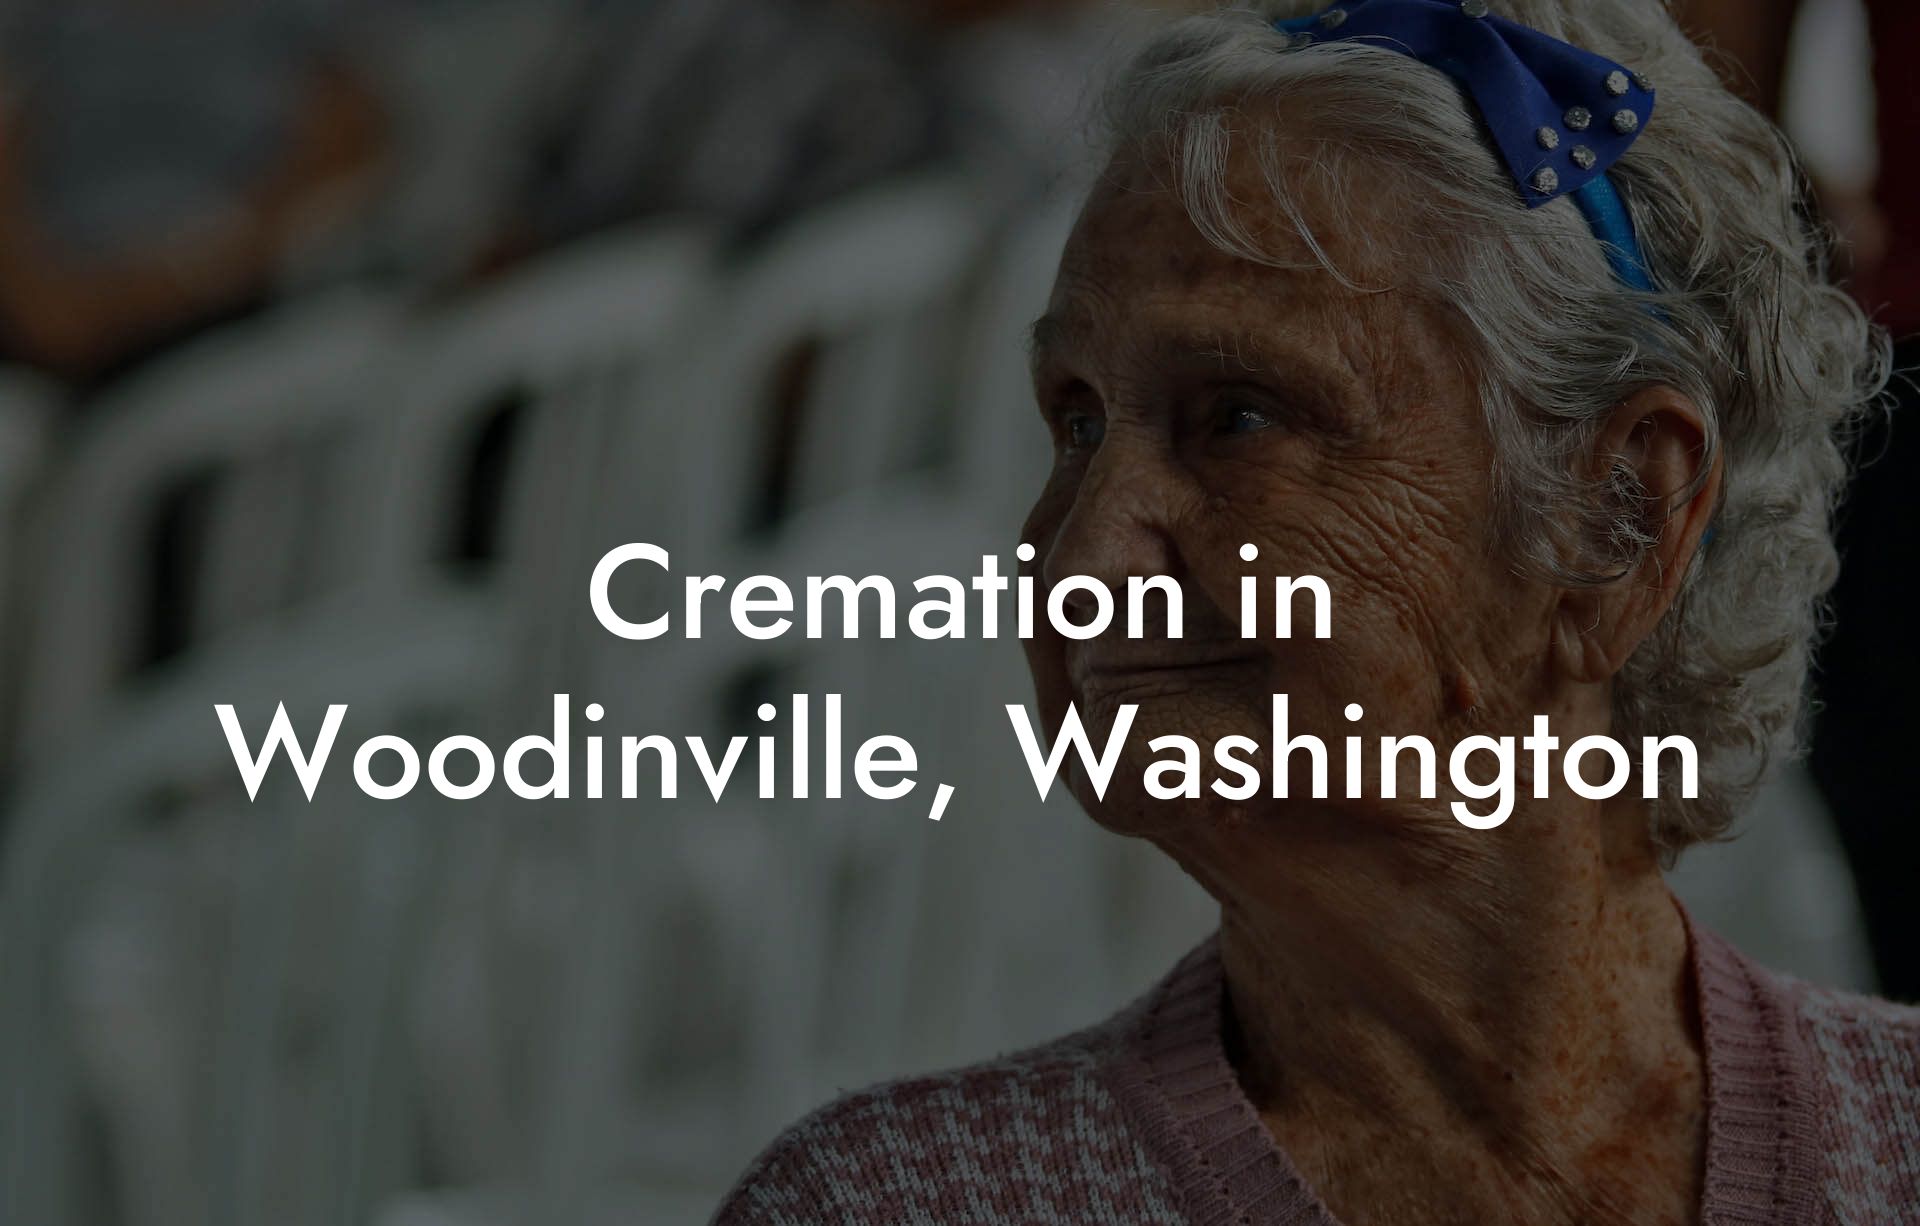 Cremation in Woodinville, Washington